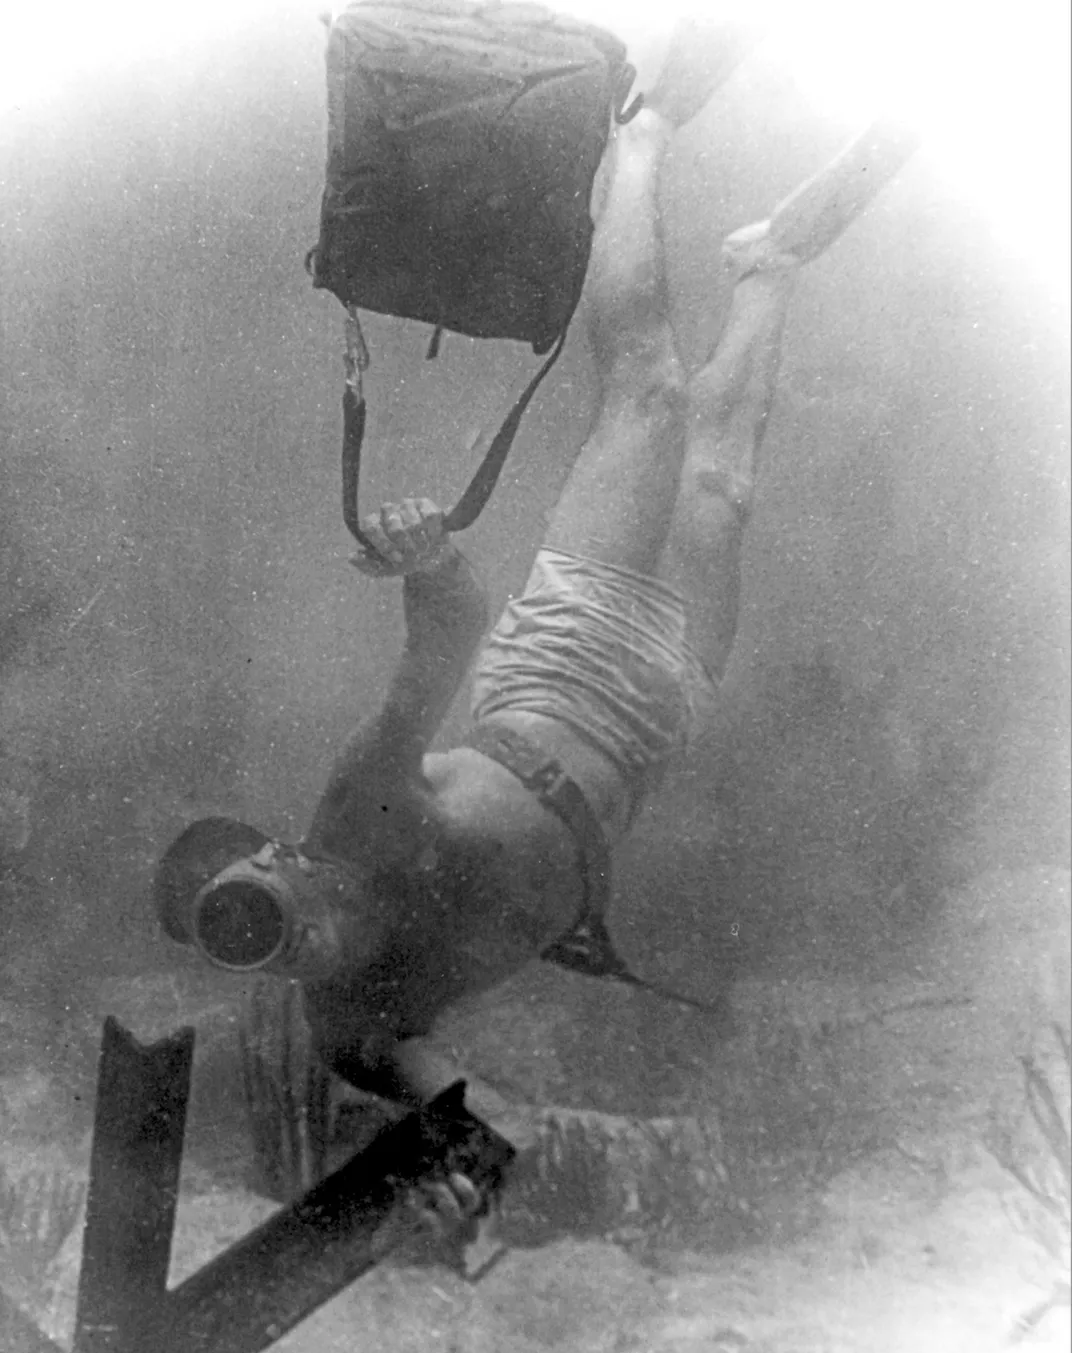 A UDT member attaching explosives to an underwater obstacle